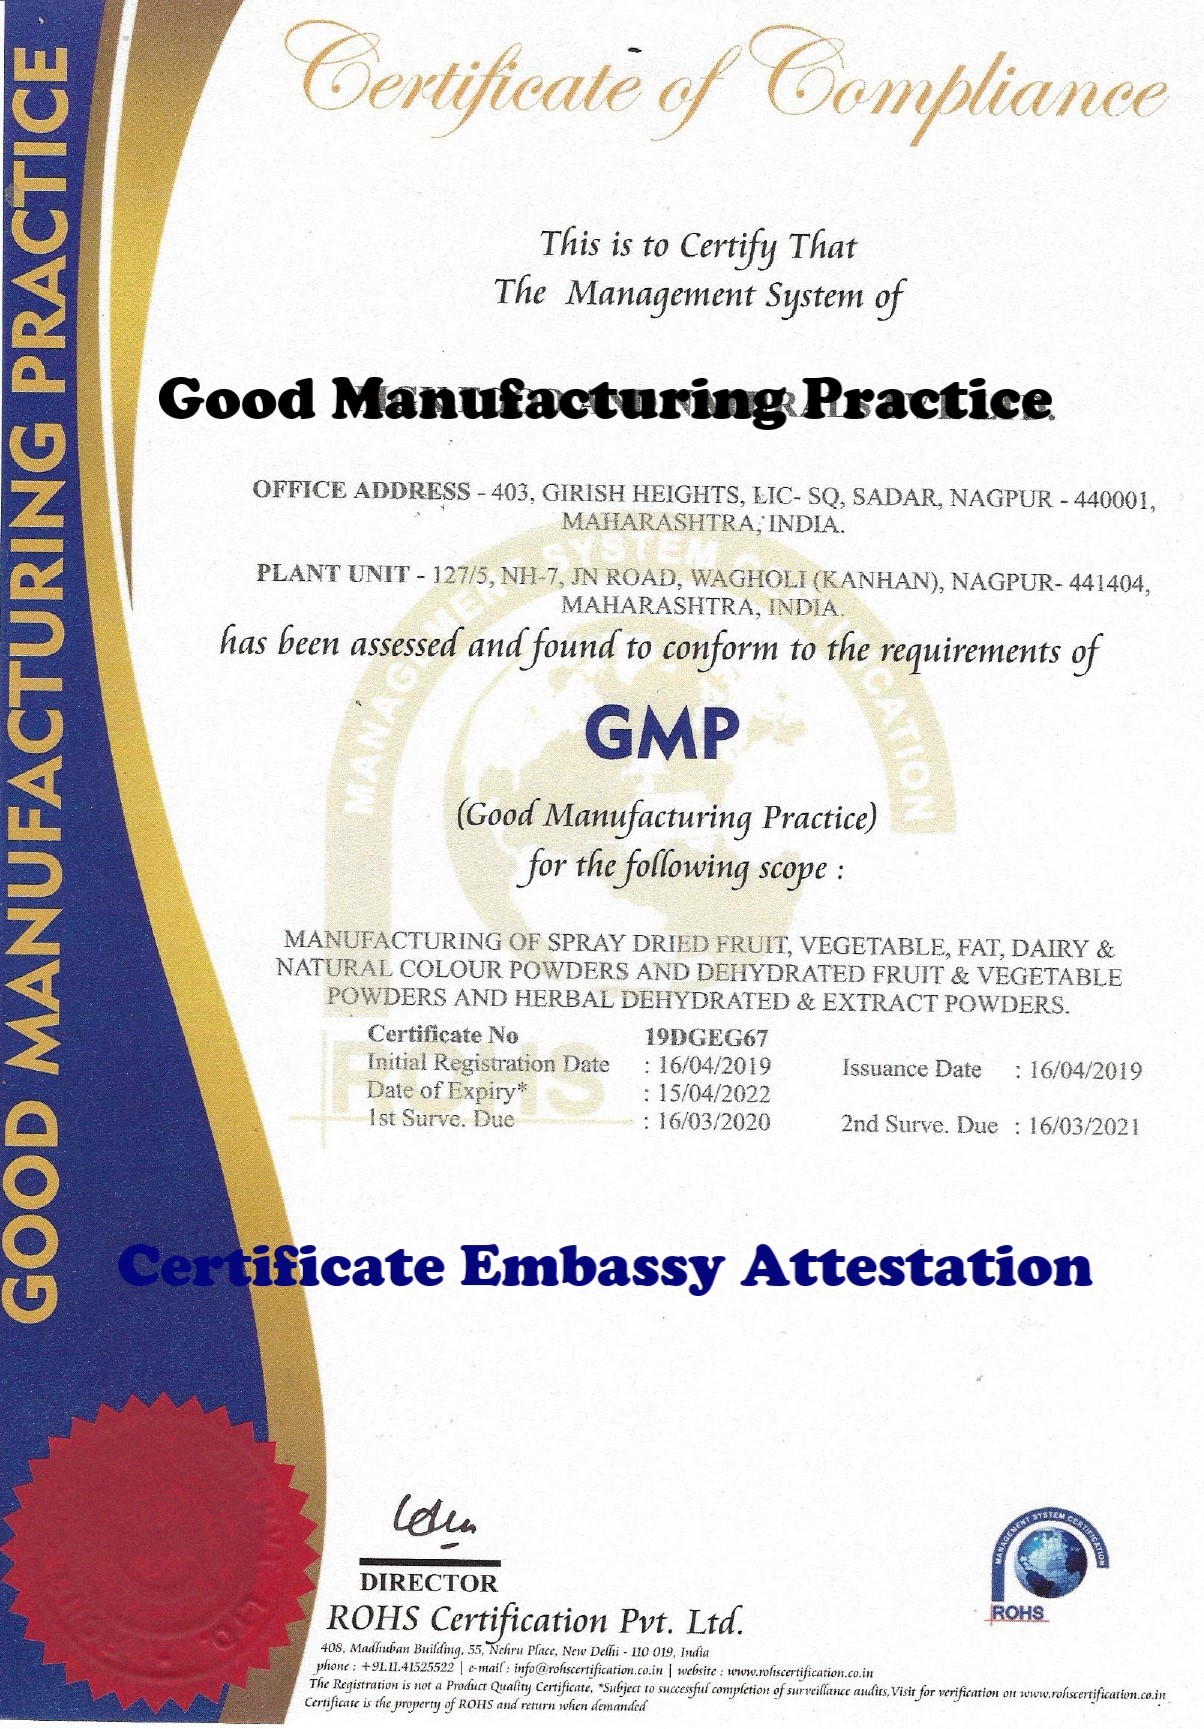 GMP Certificate Attestation from Benin Embassy